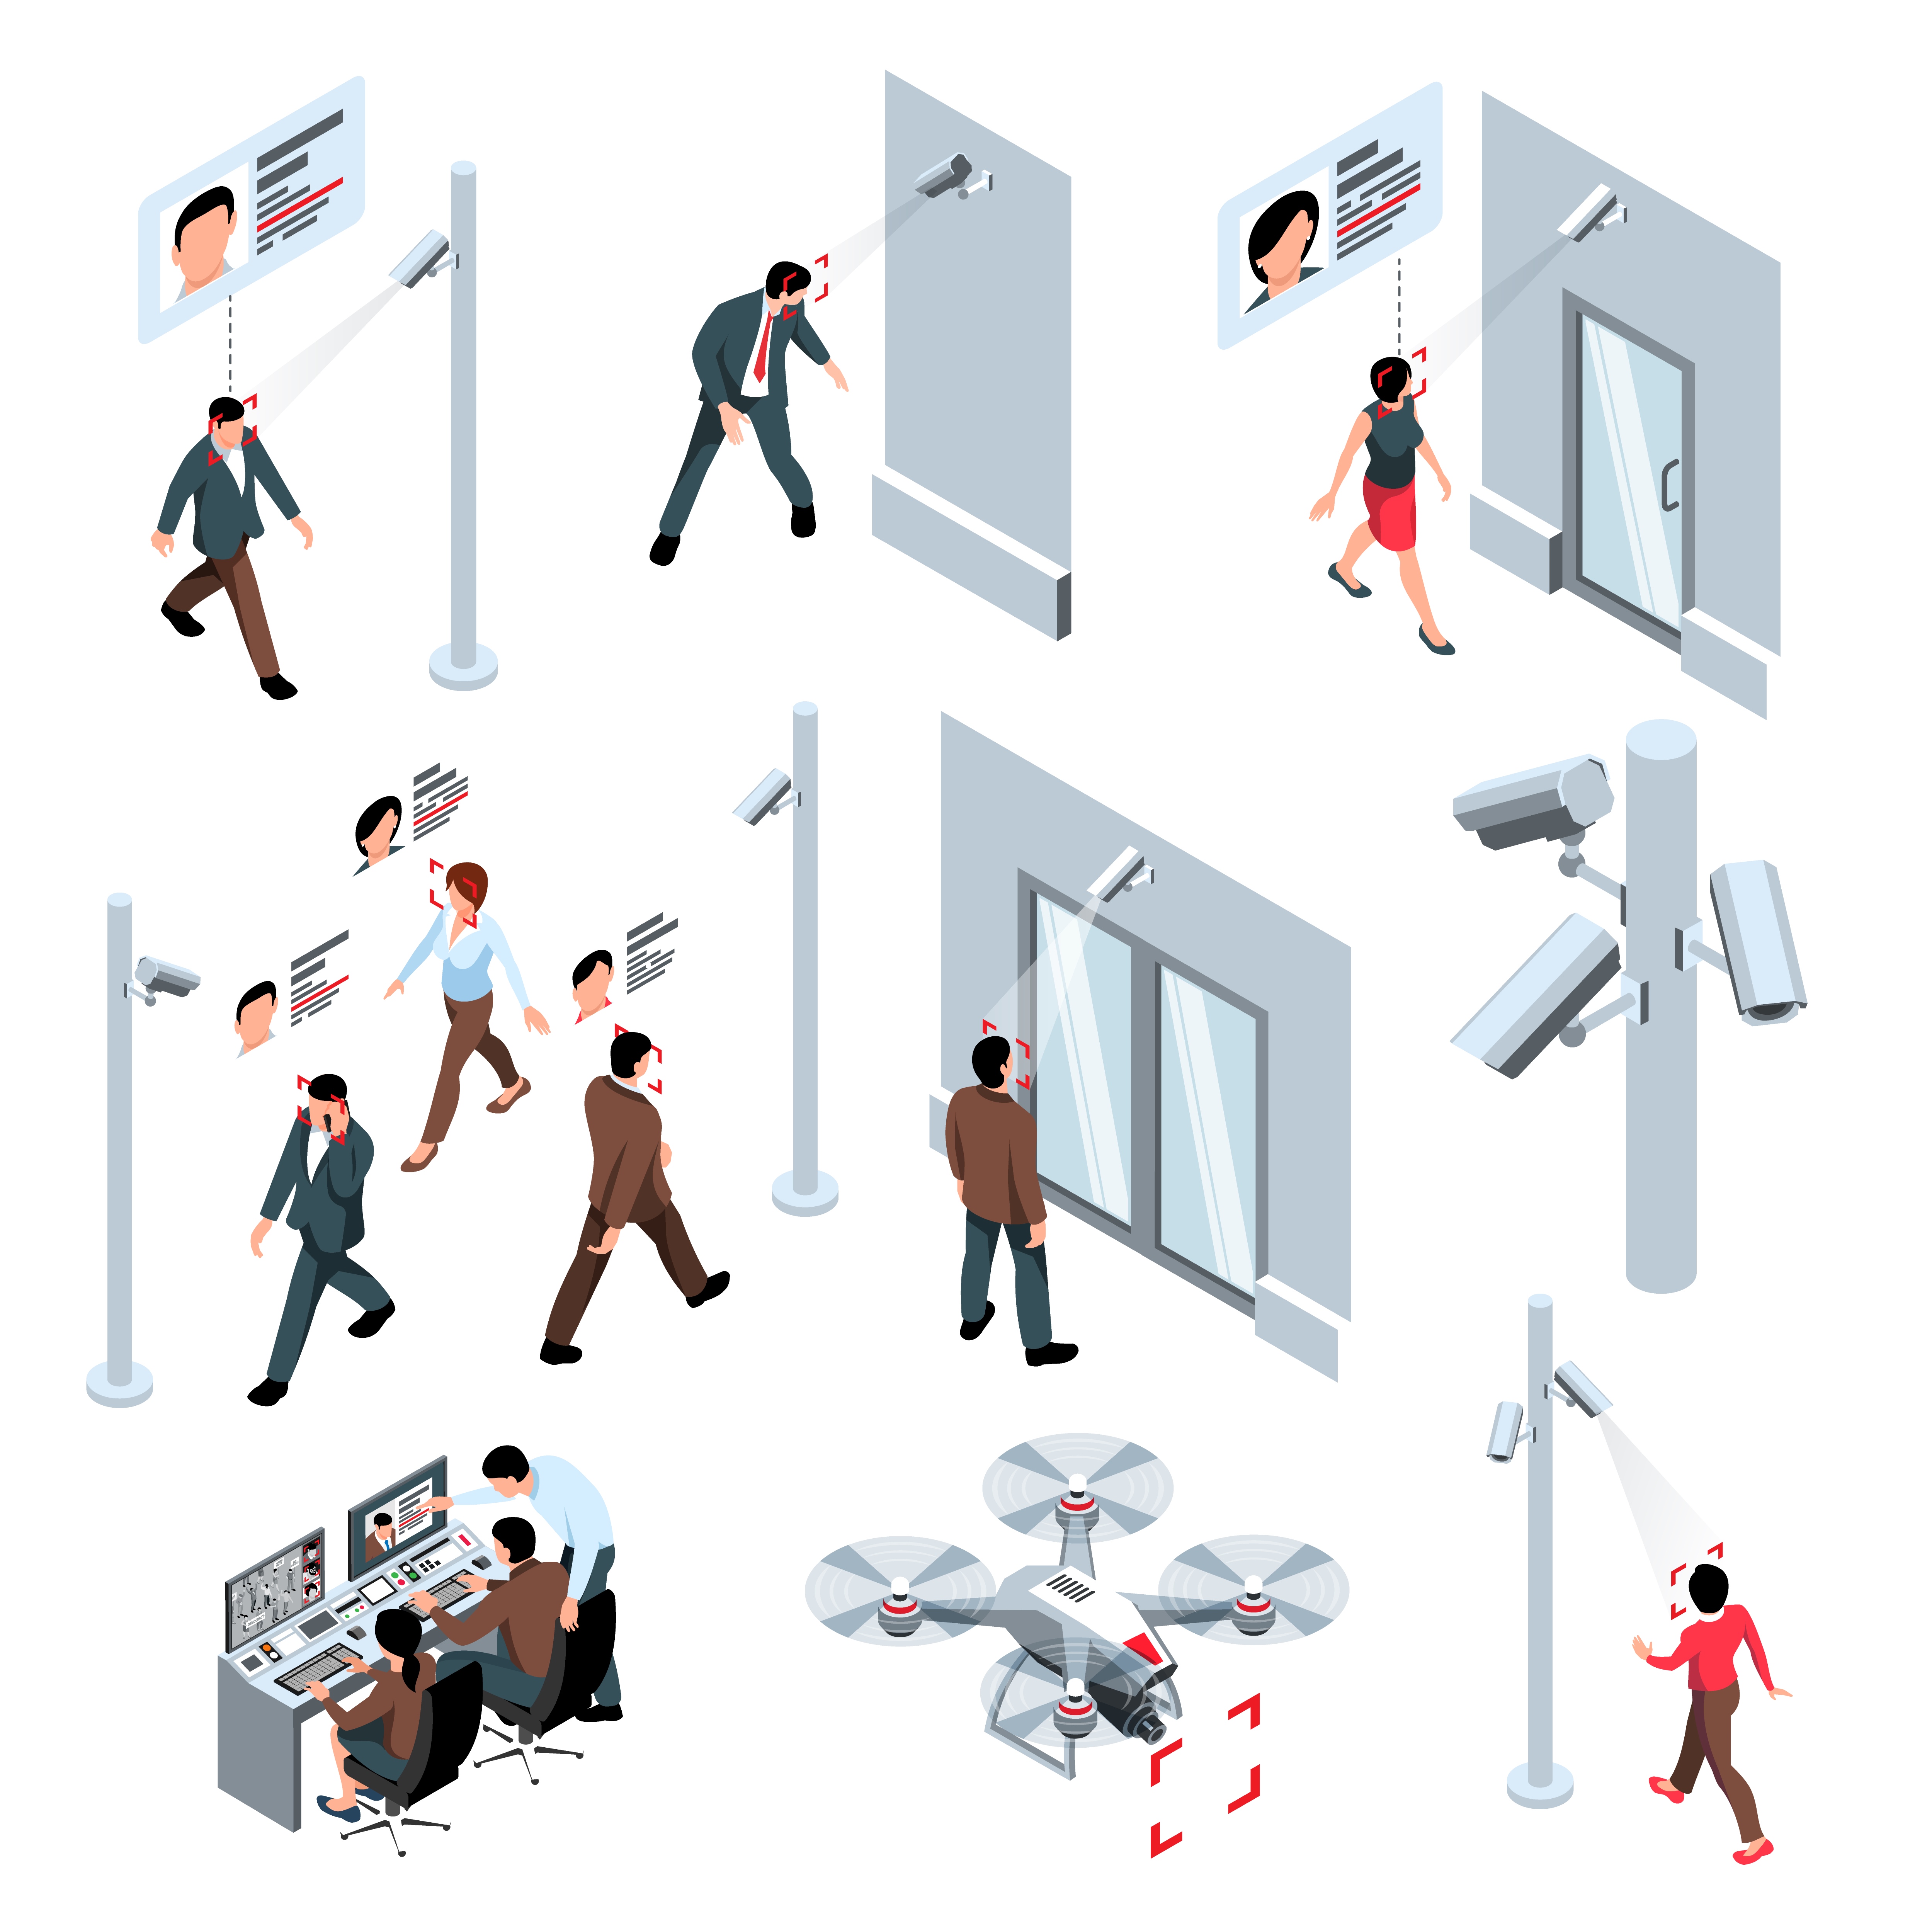 Isometric public security recognition cctv technology set of isolated icons with flying drone cameras and people vector illustration